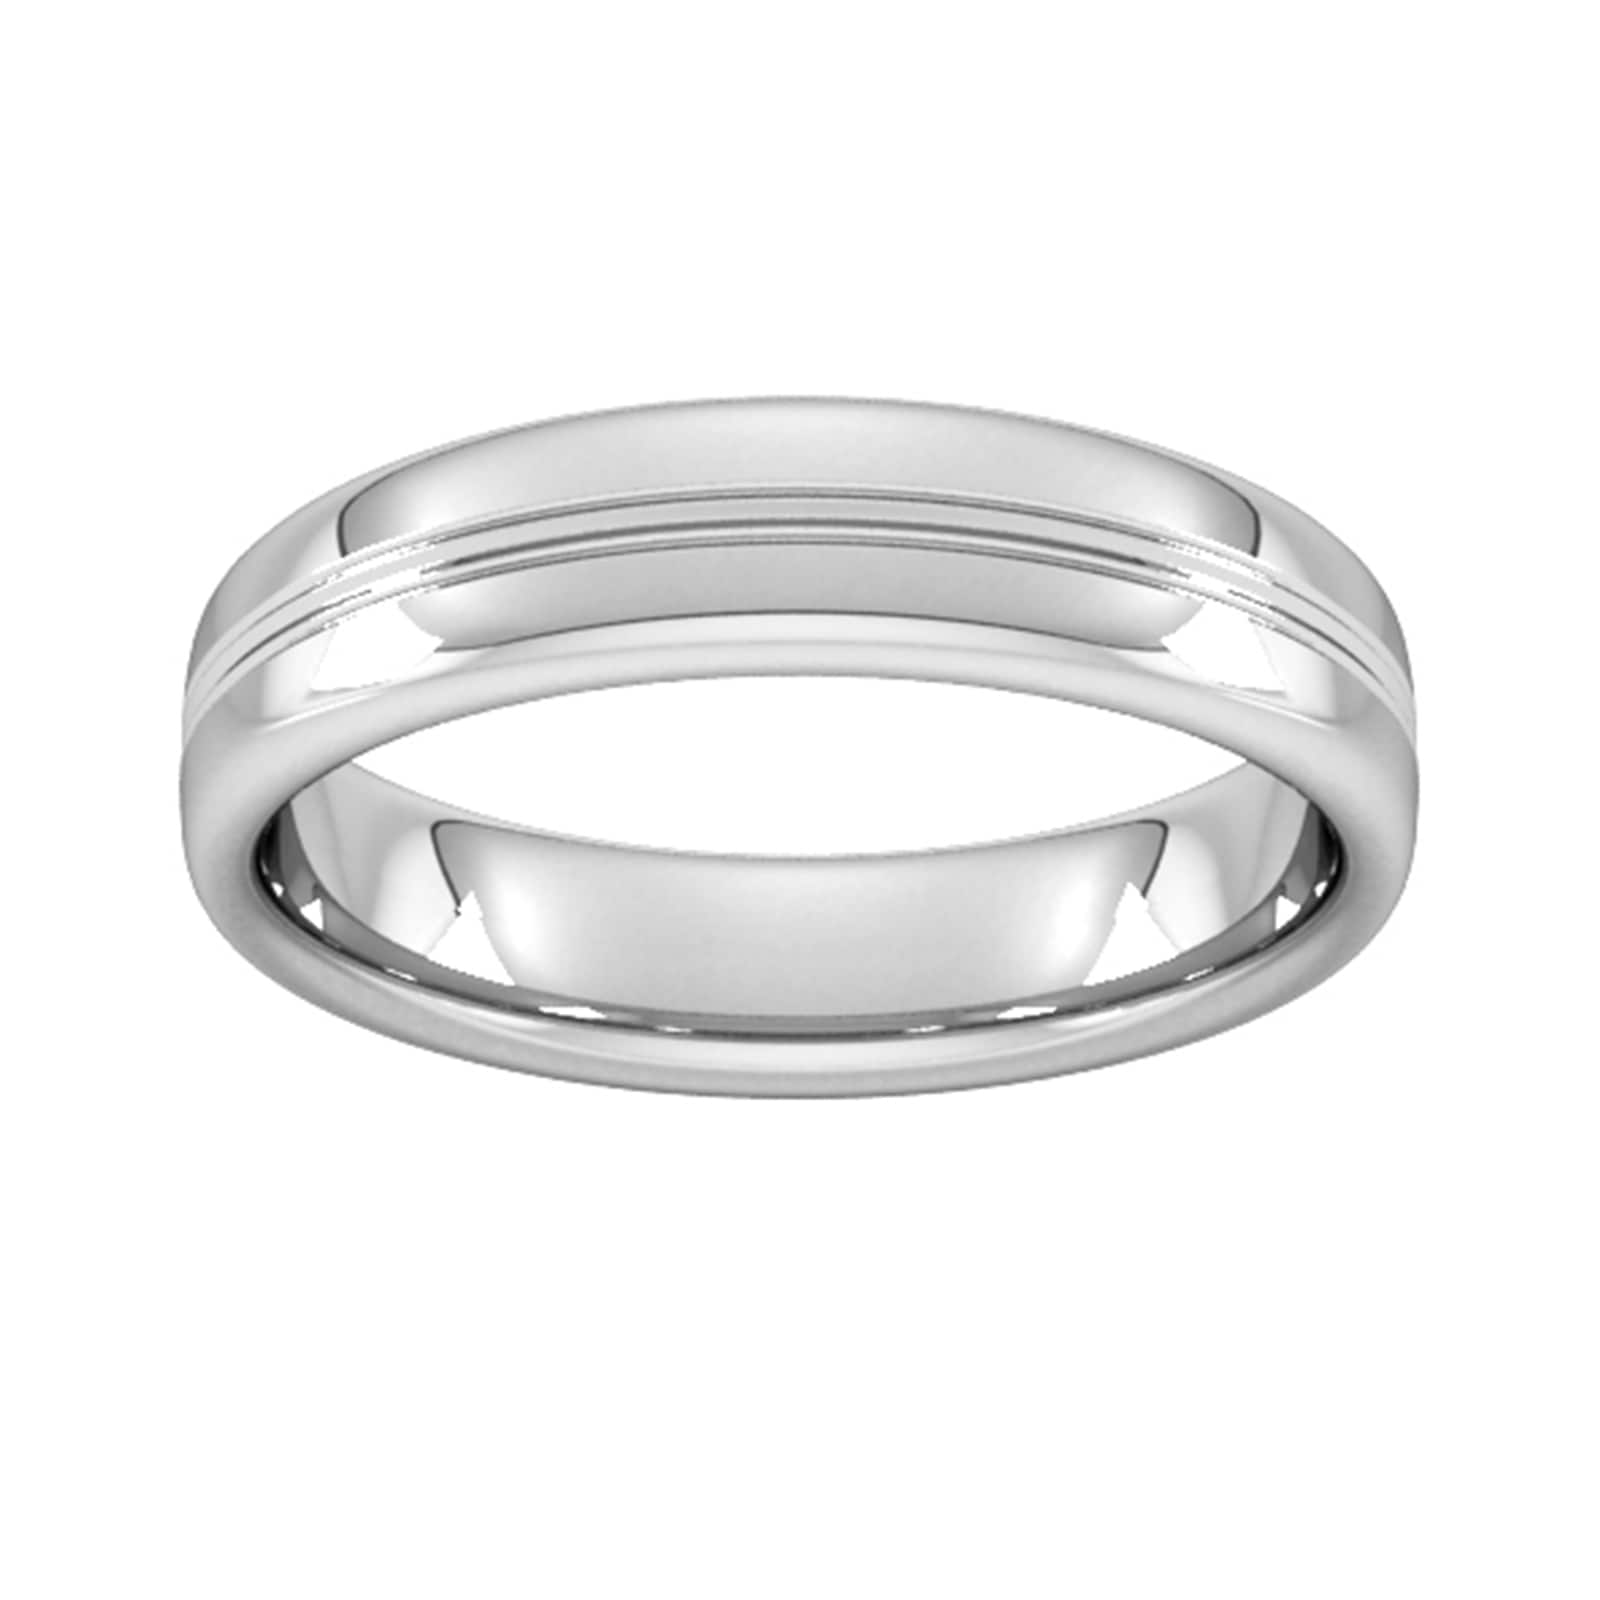 5mm Slight Court Extra Heavy Grooved Polished Finish Wedding Ring In 950 Palladium - Ring Size Z